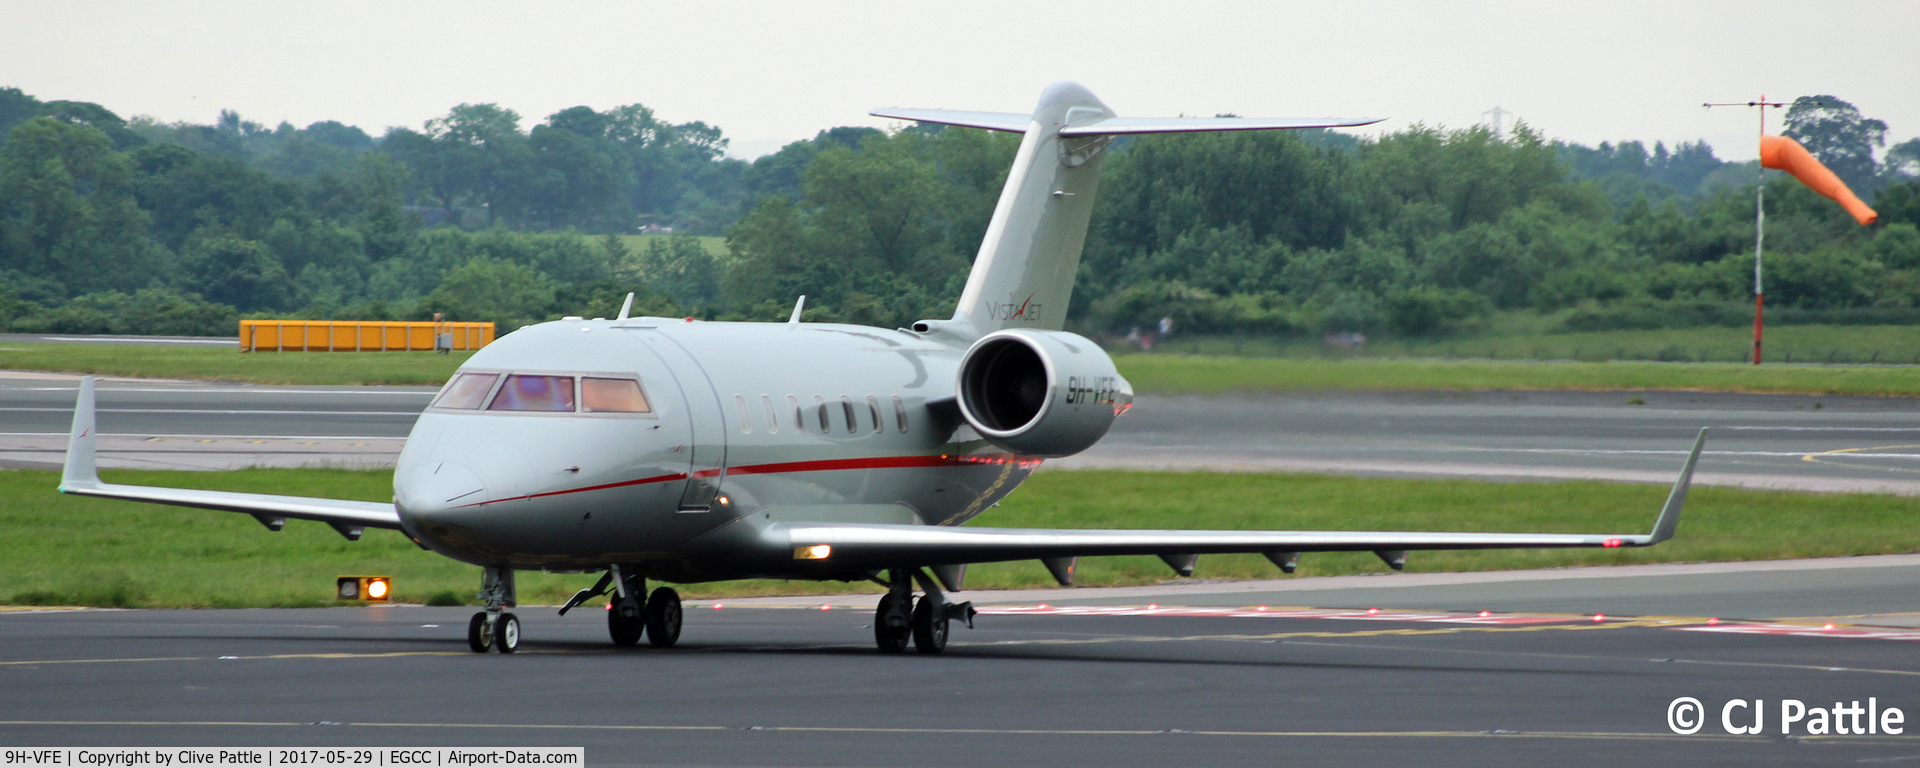 9H-VFE, 2014 Bombardier Challenger 605 (CL-600-2B16) C/N 5974, Pictured at Manchester EGCC